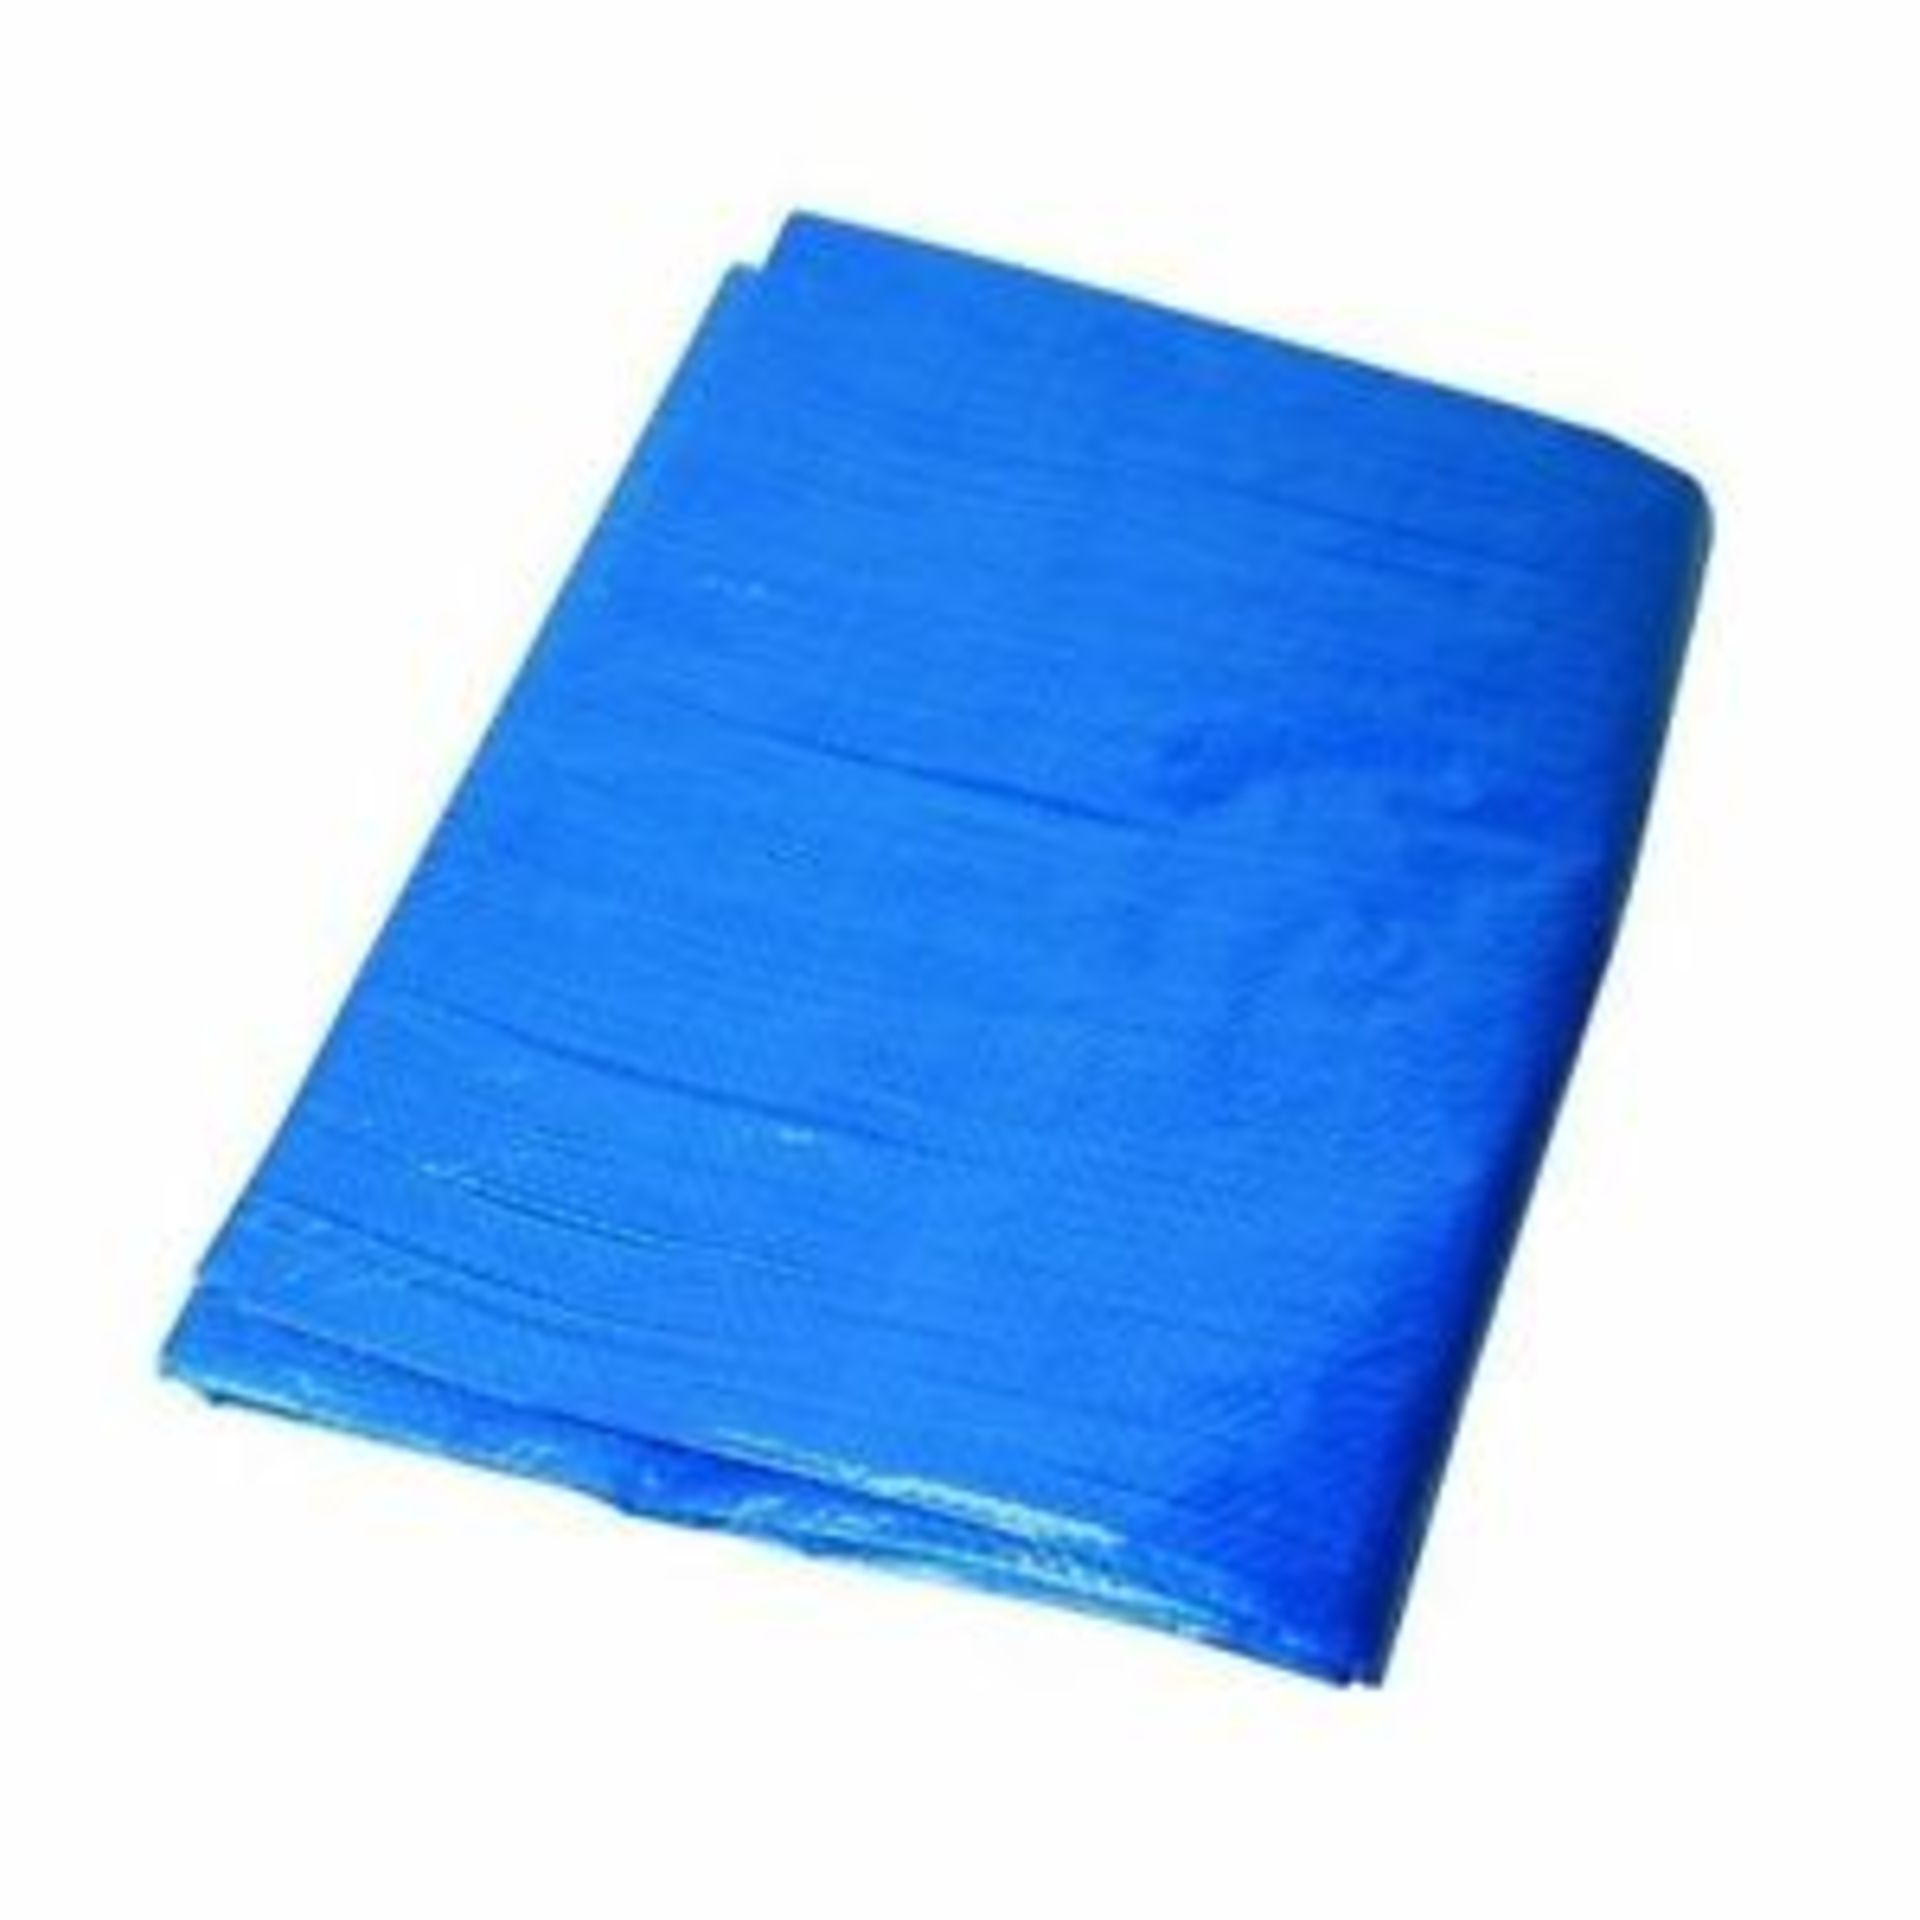 V *TRADE QTY* Brand New 12 x 8ft Blue Tarpaulin X 5 YOUR BID PRICE TO BE MULTIPLIED BY FIVE